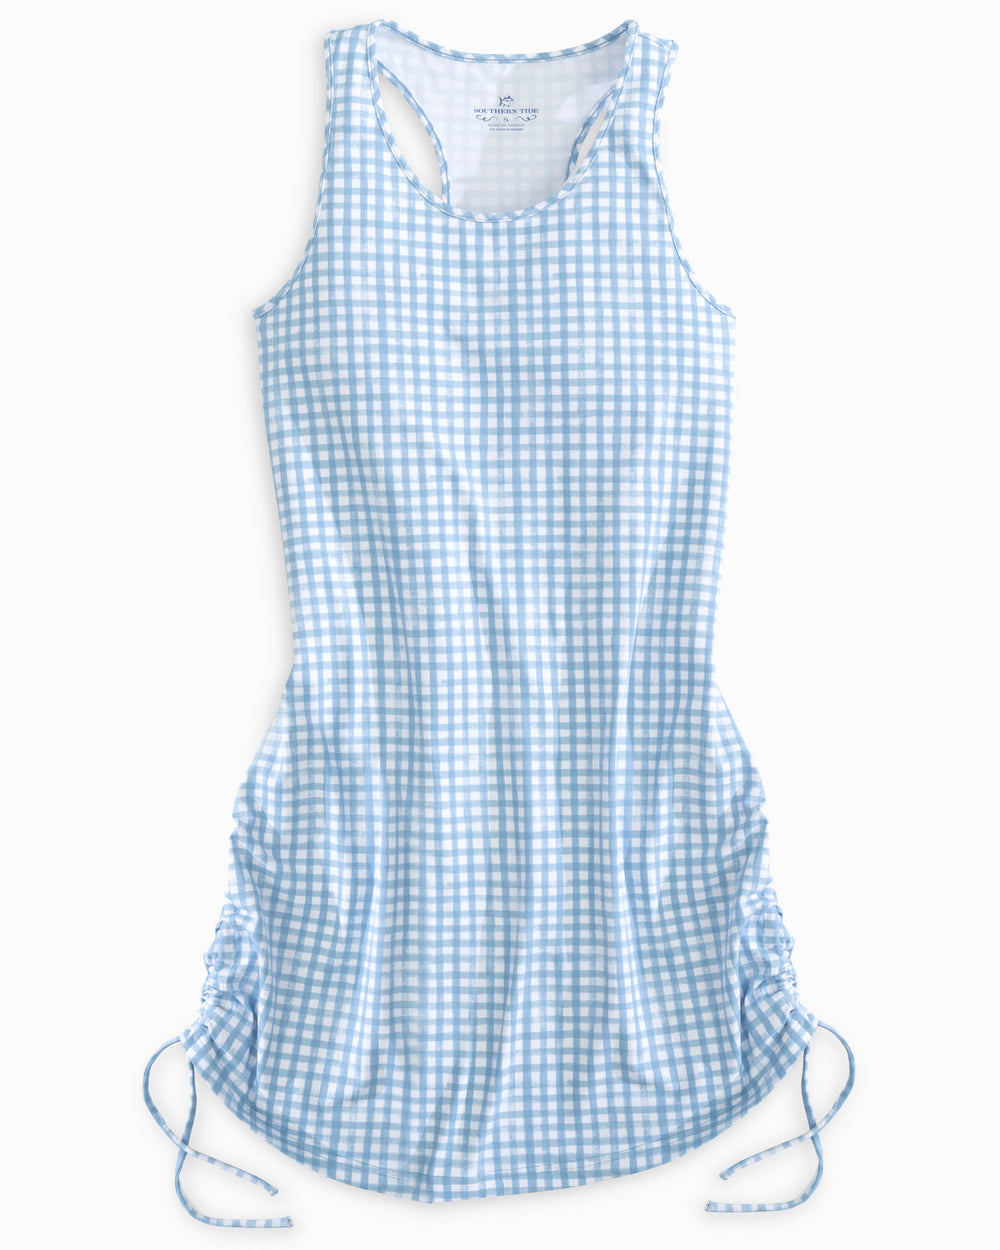 The front flat view of the Kinsley Performance Dress by Southern Tide - Sky Blue